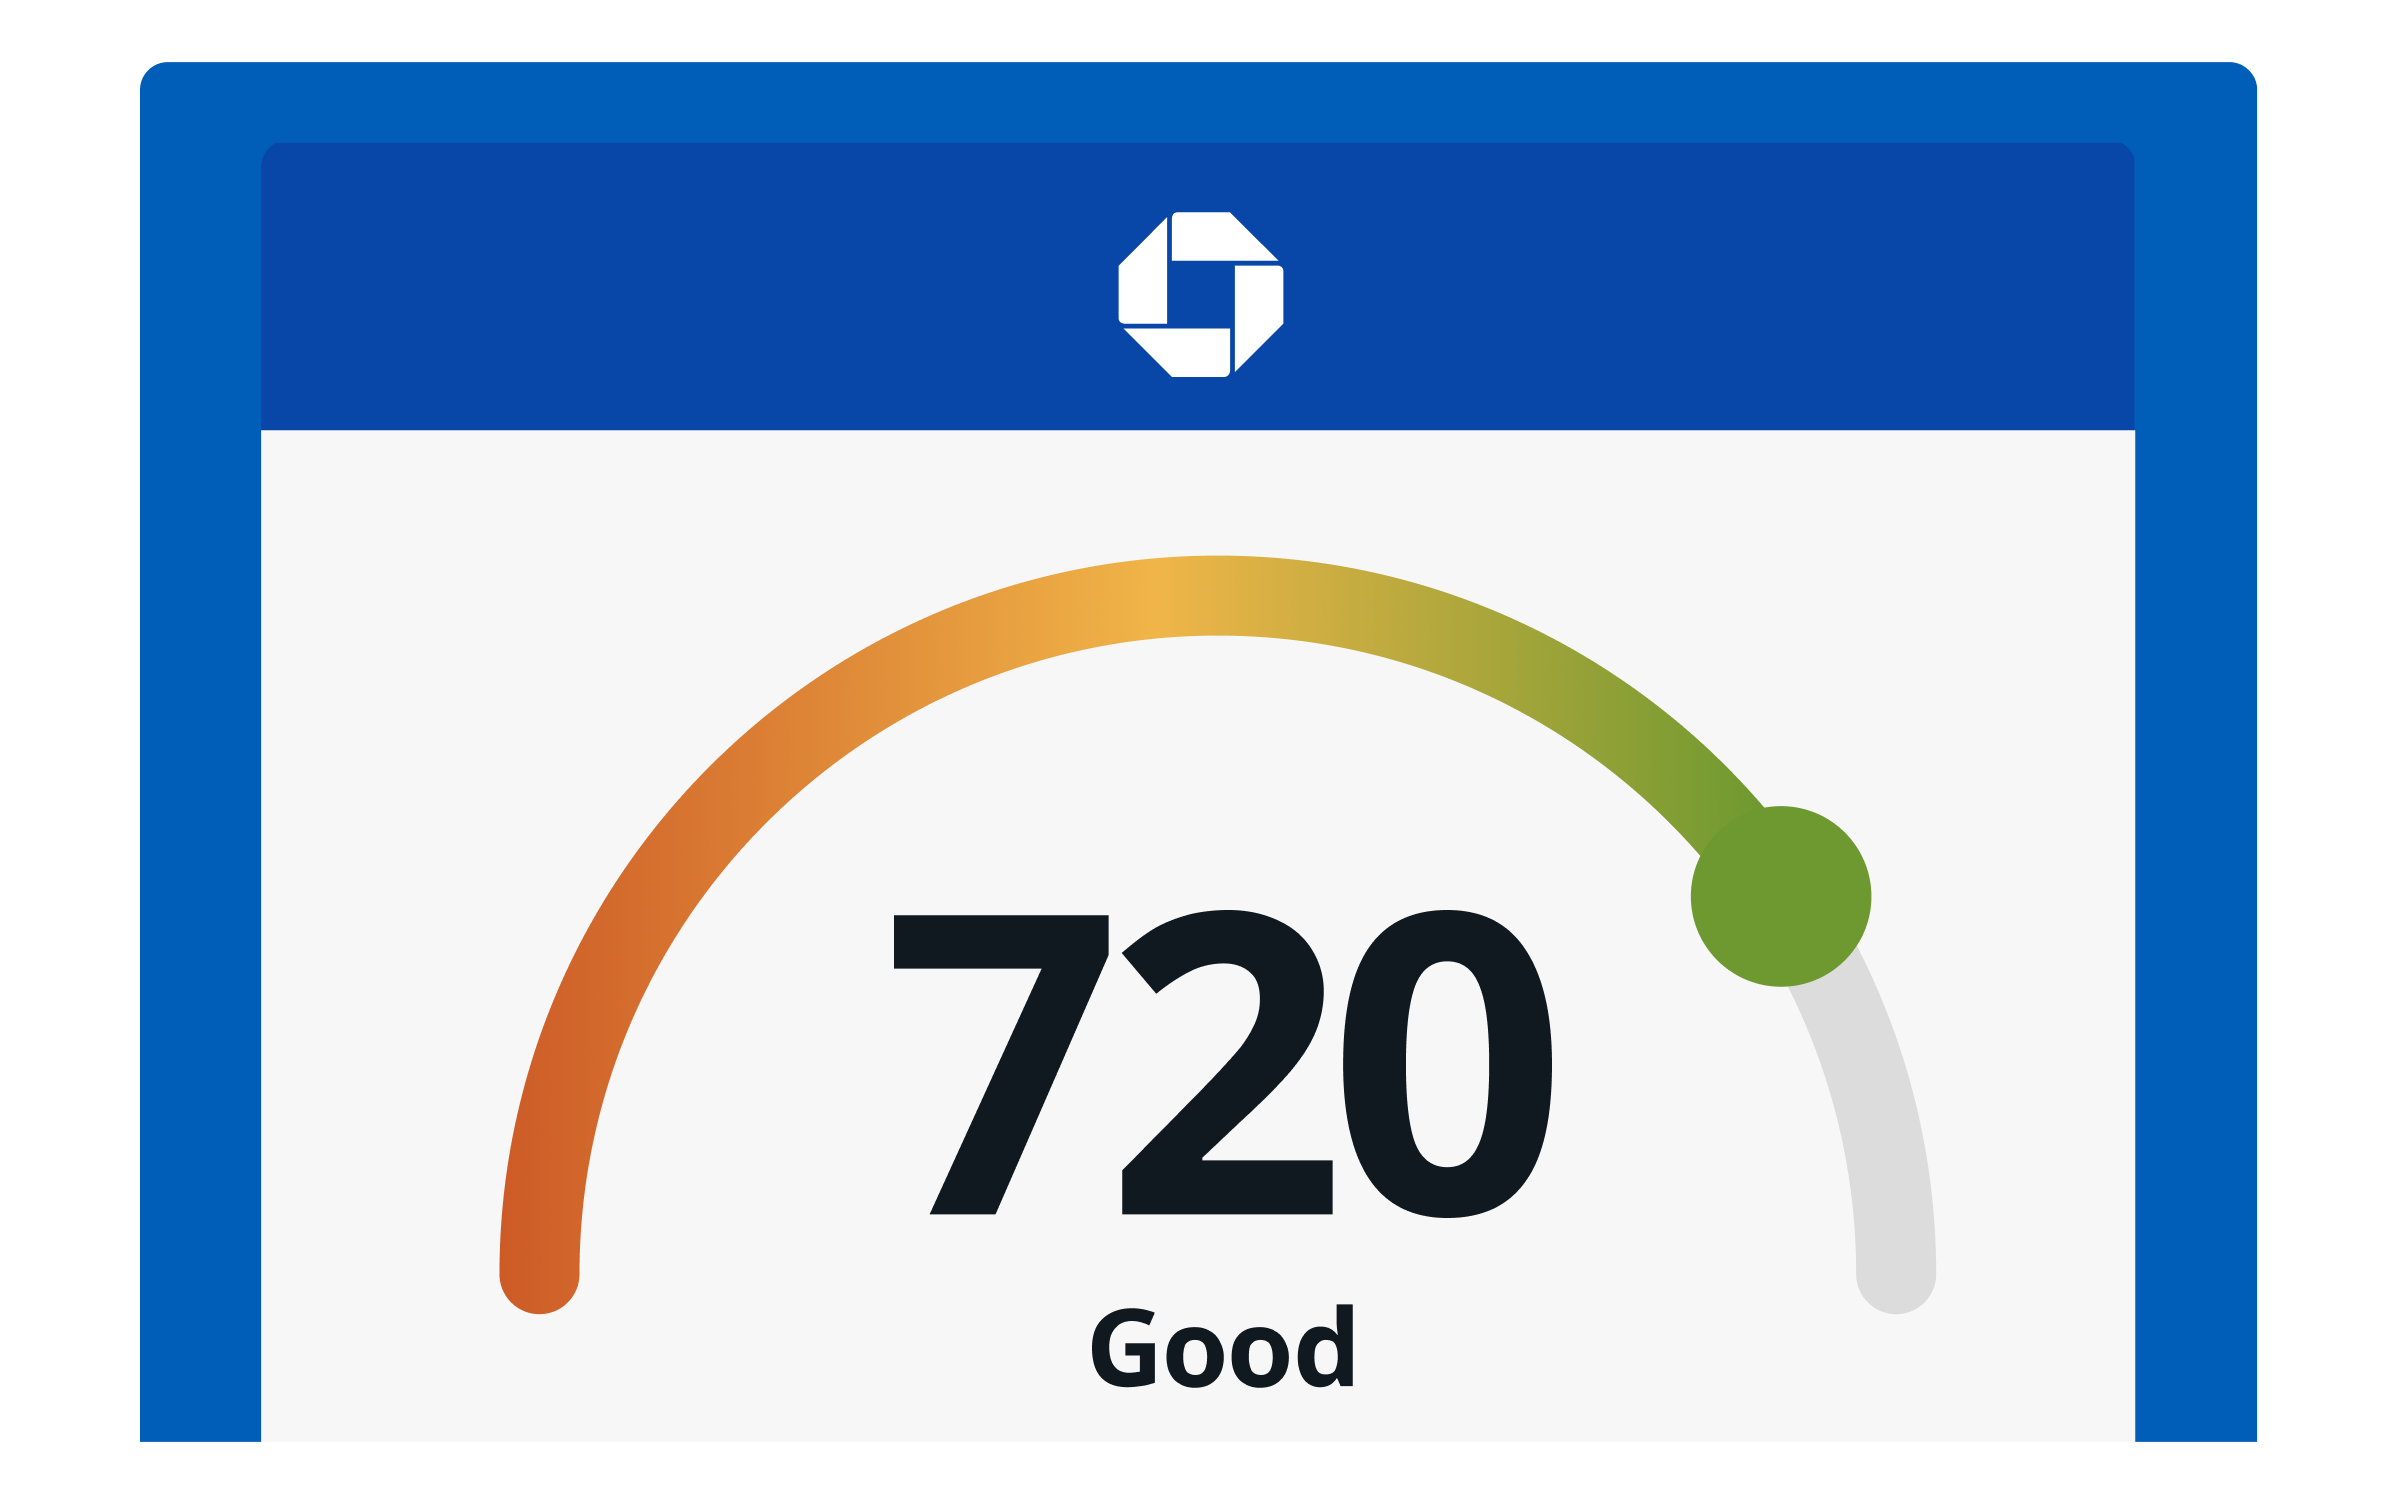 720 is a good credit score